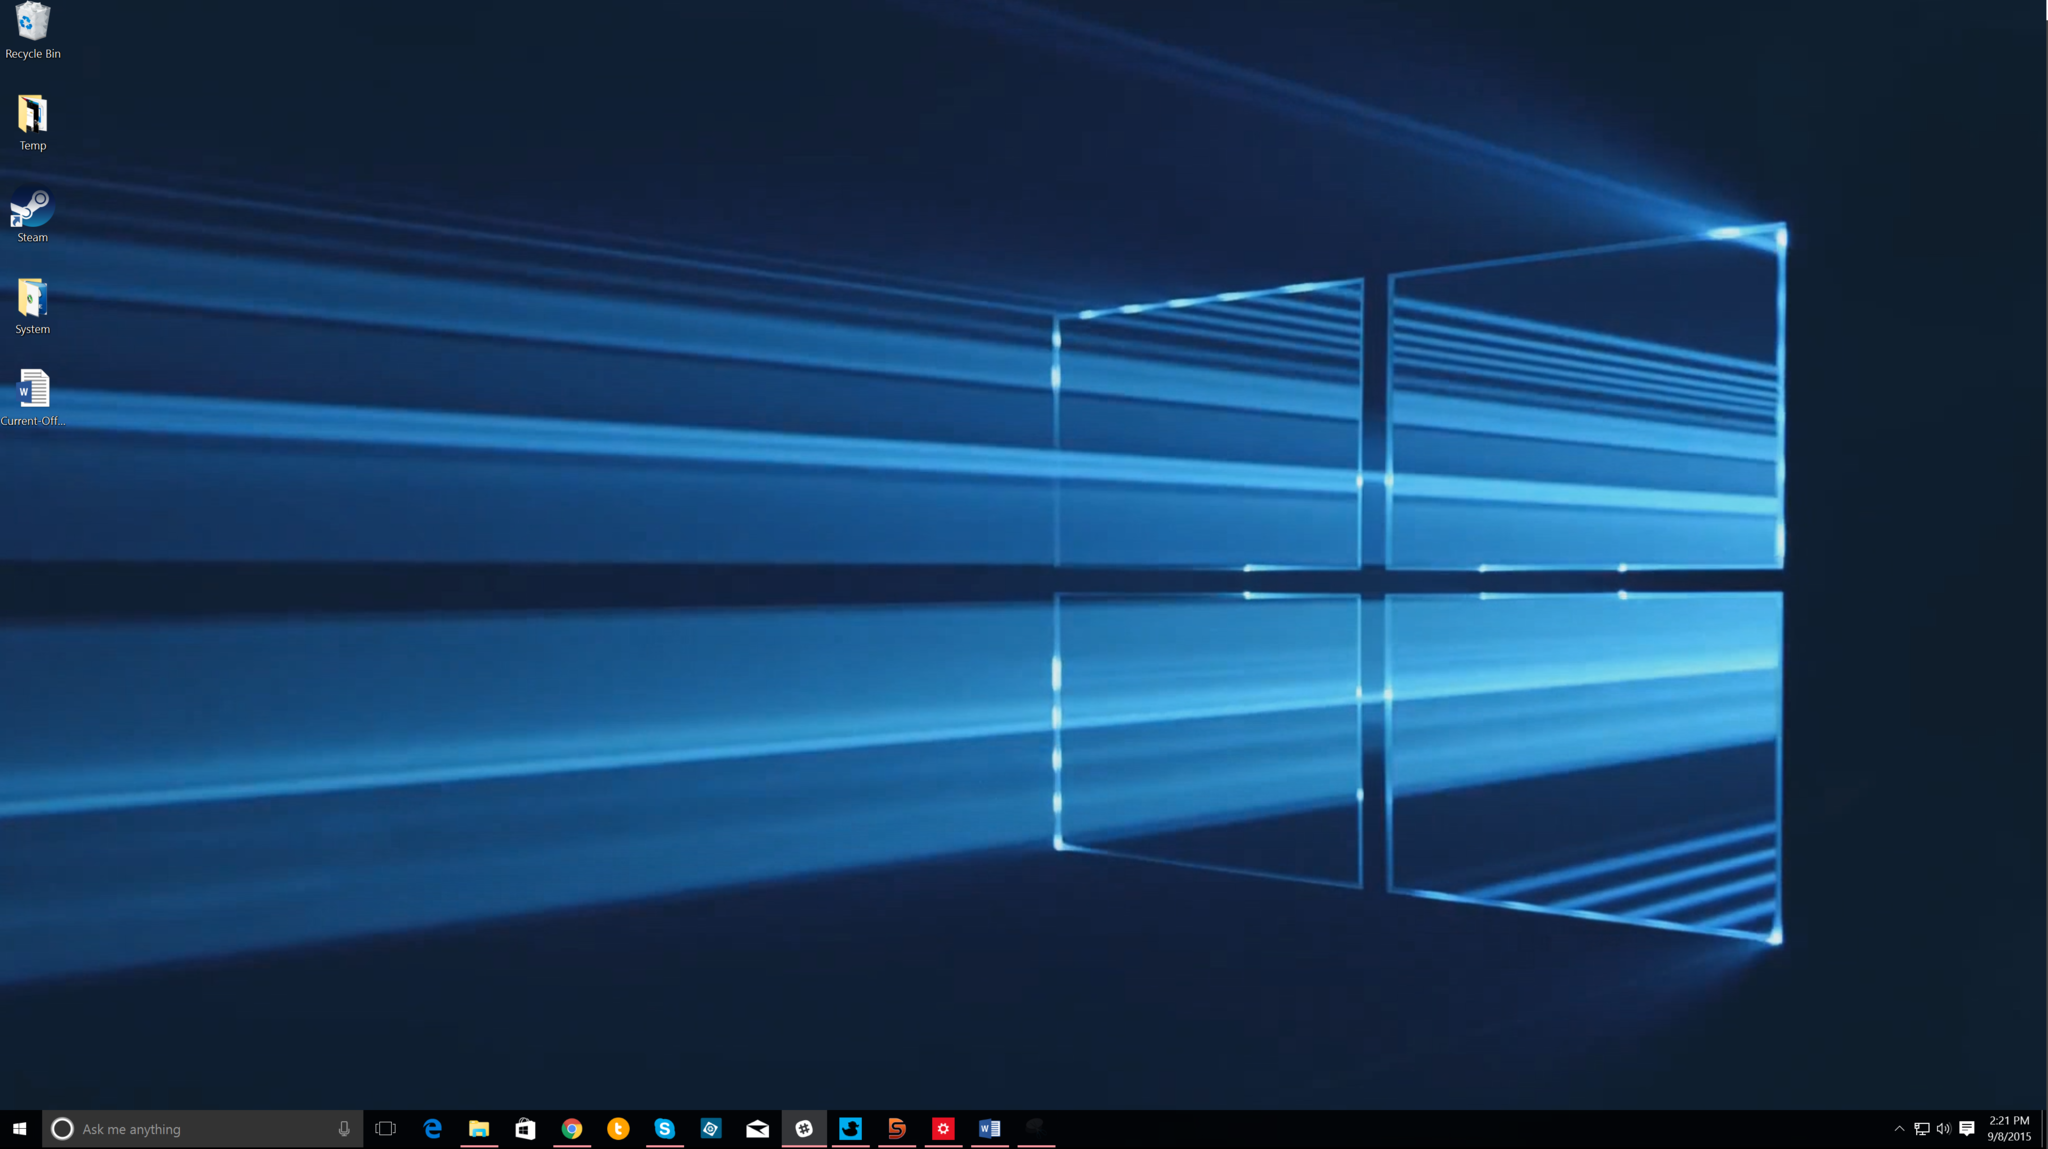 How To Get An Animated Desktop In Windows 10 With Deskscapes 8